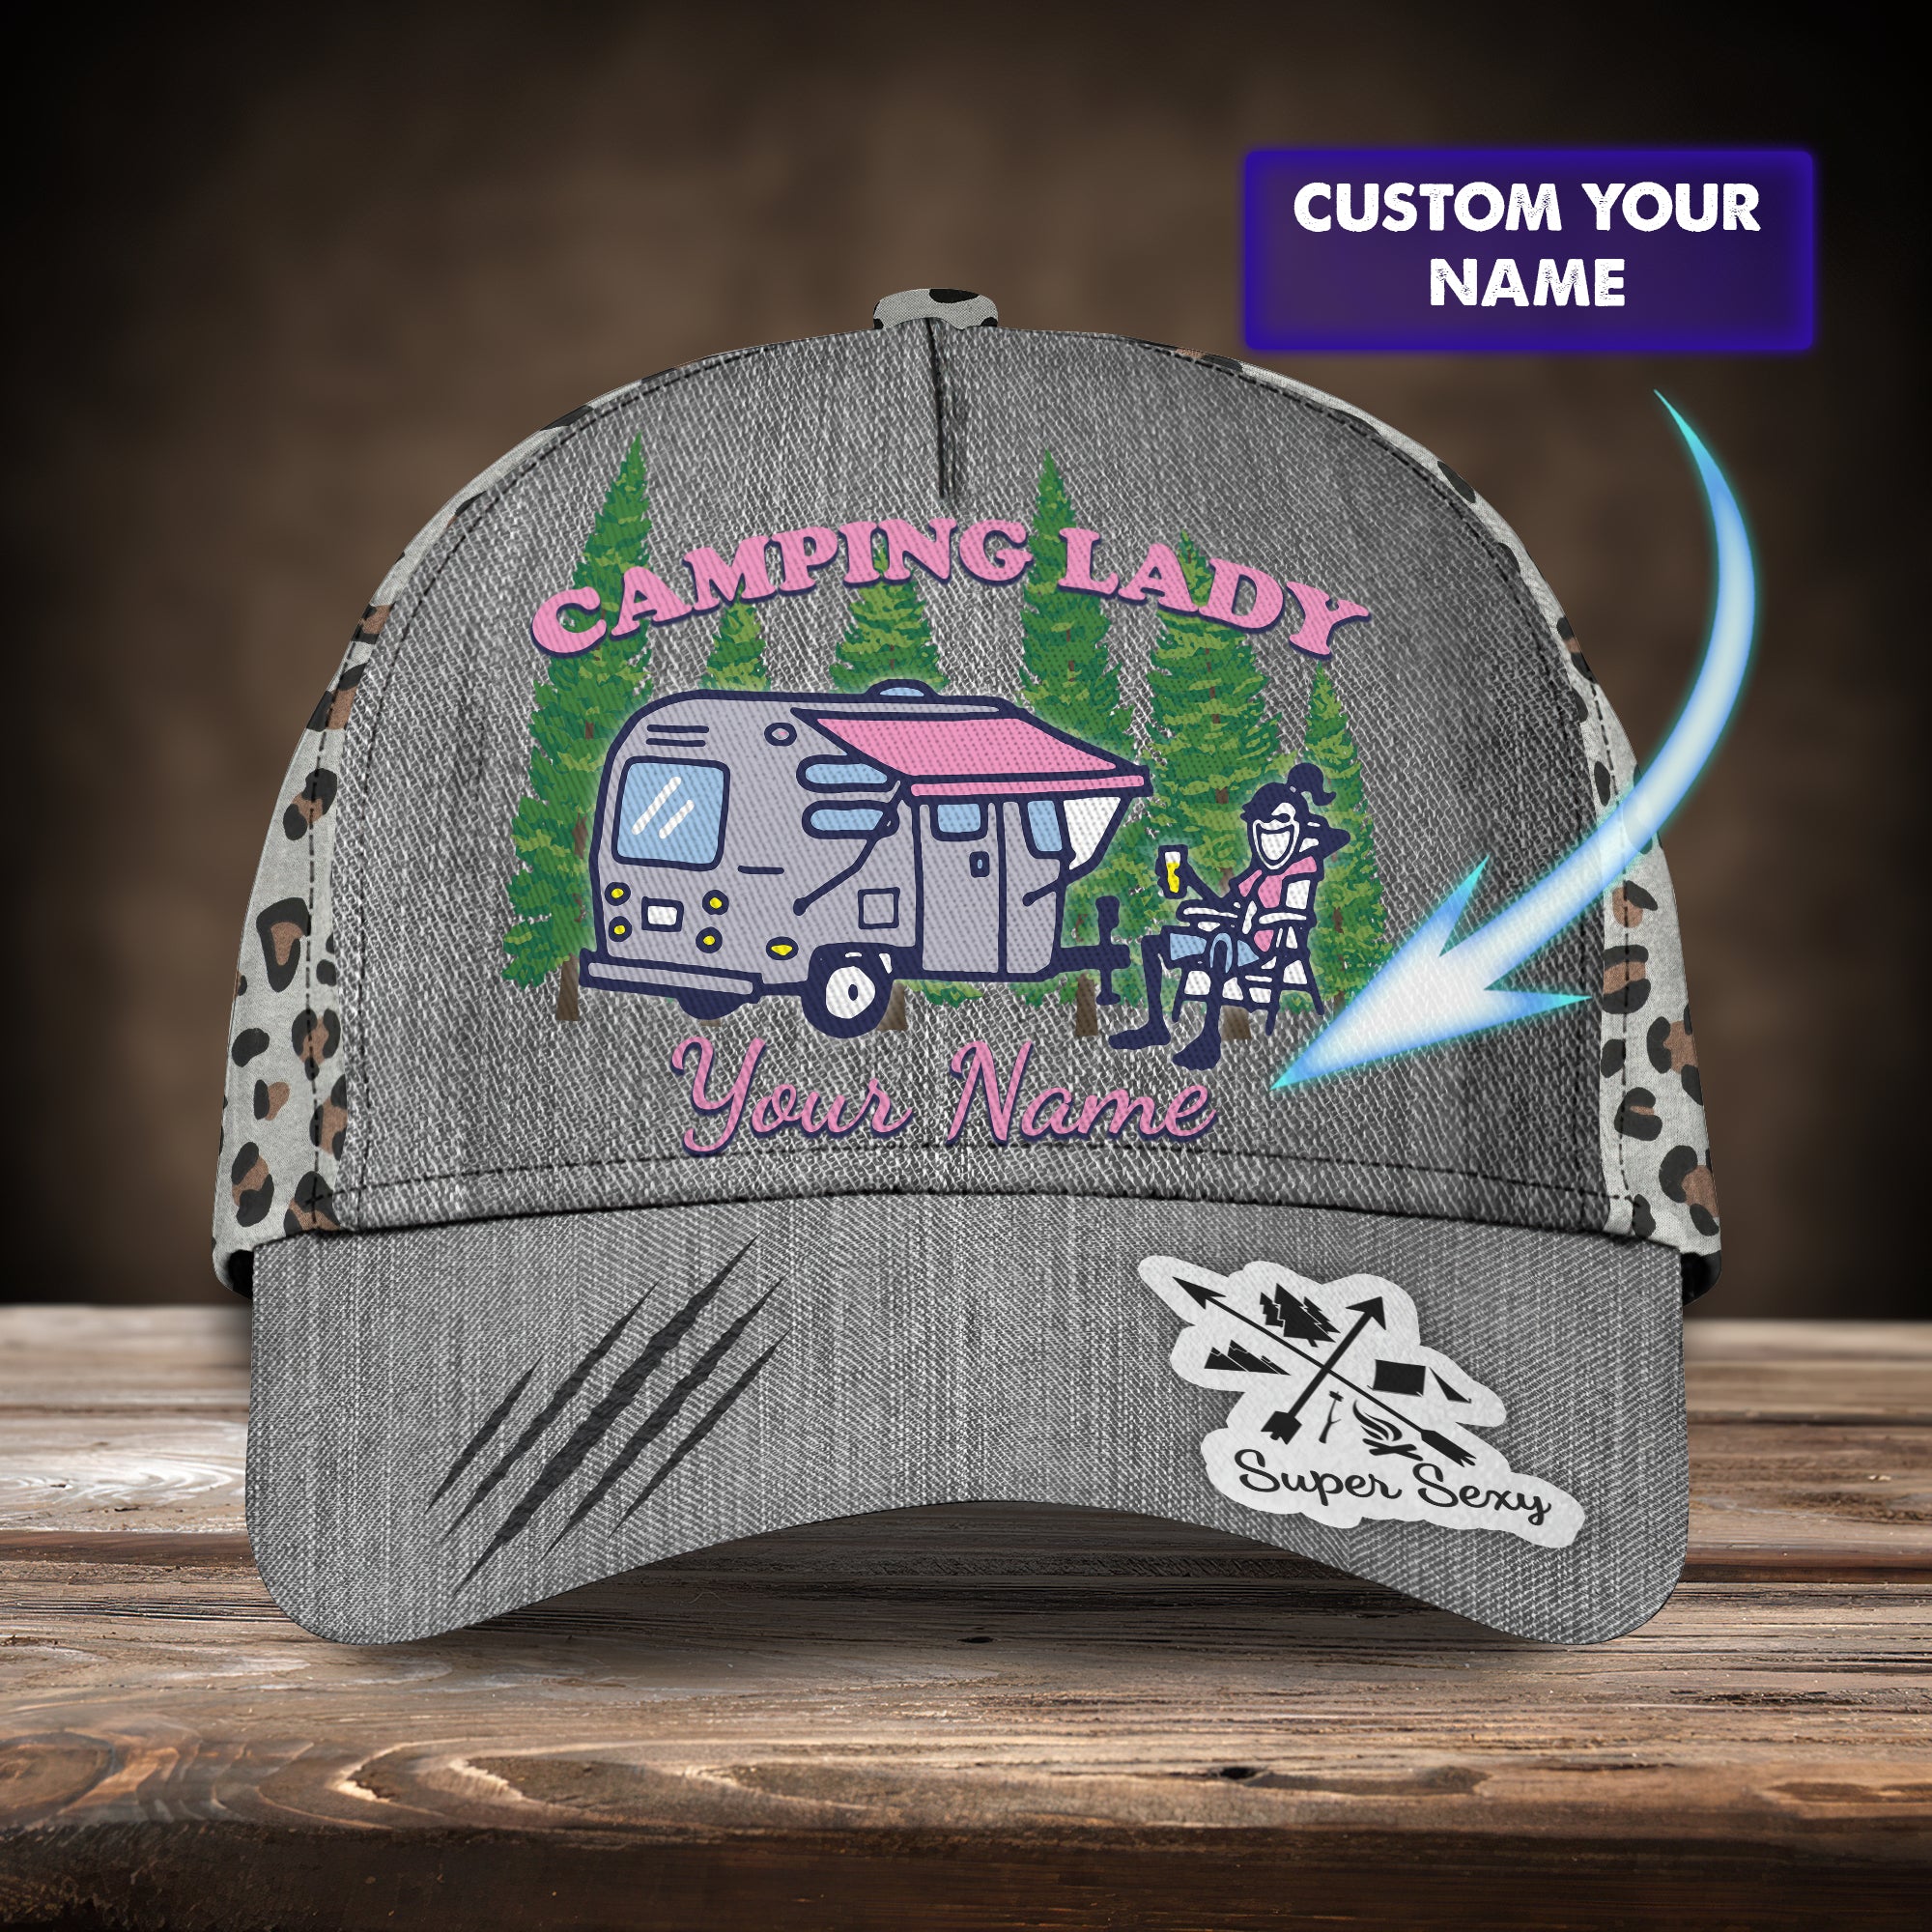 Camping Lady - Personalized Name Cap - Vtm99